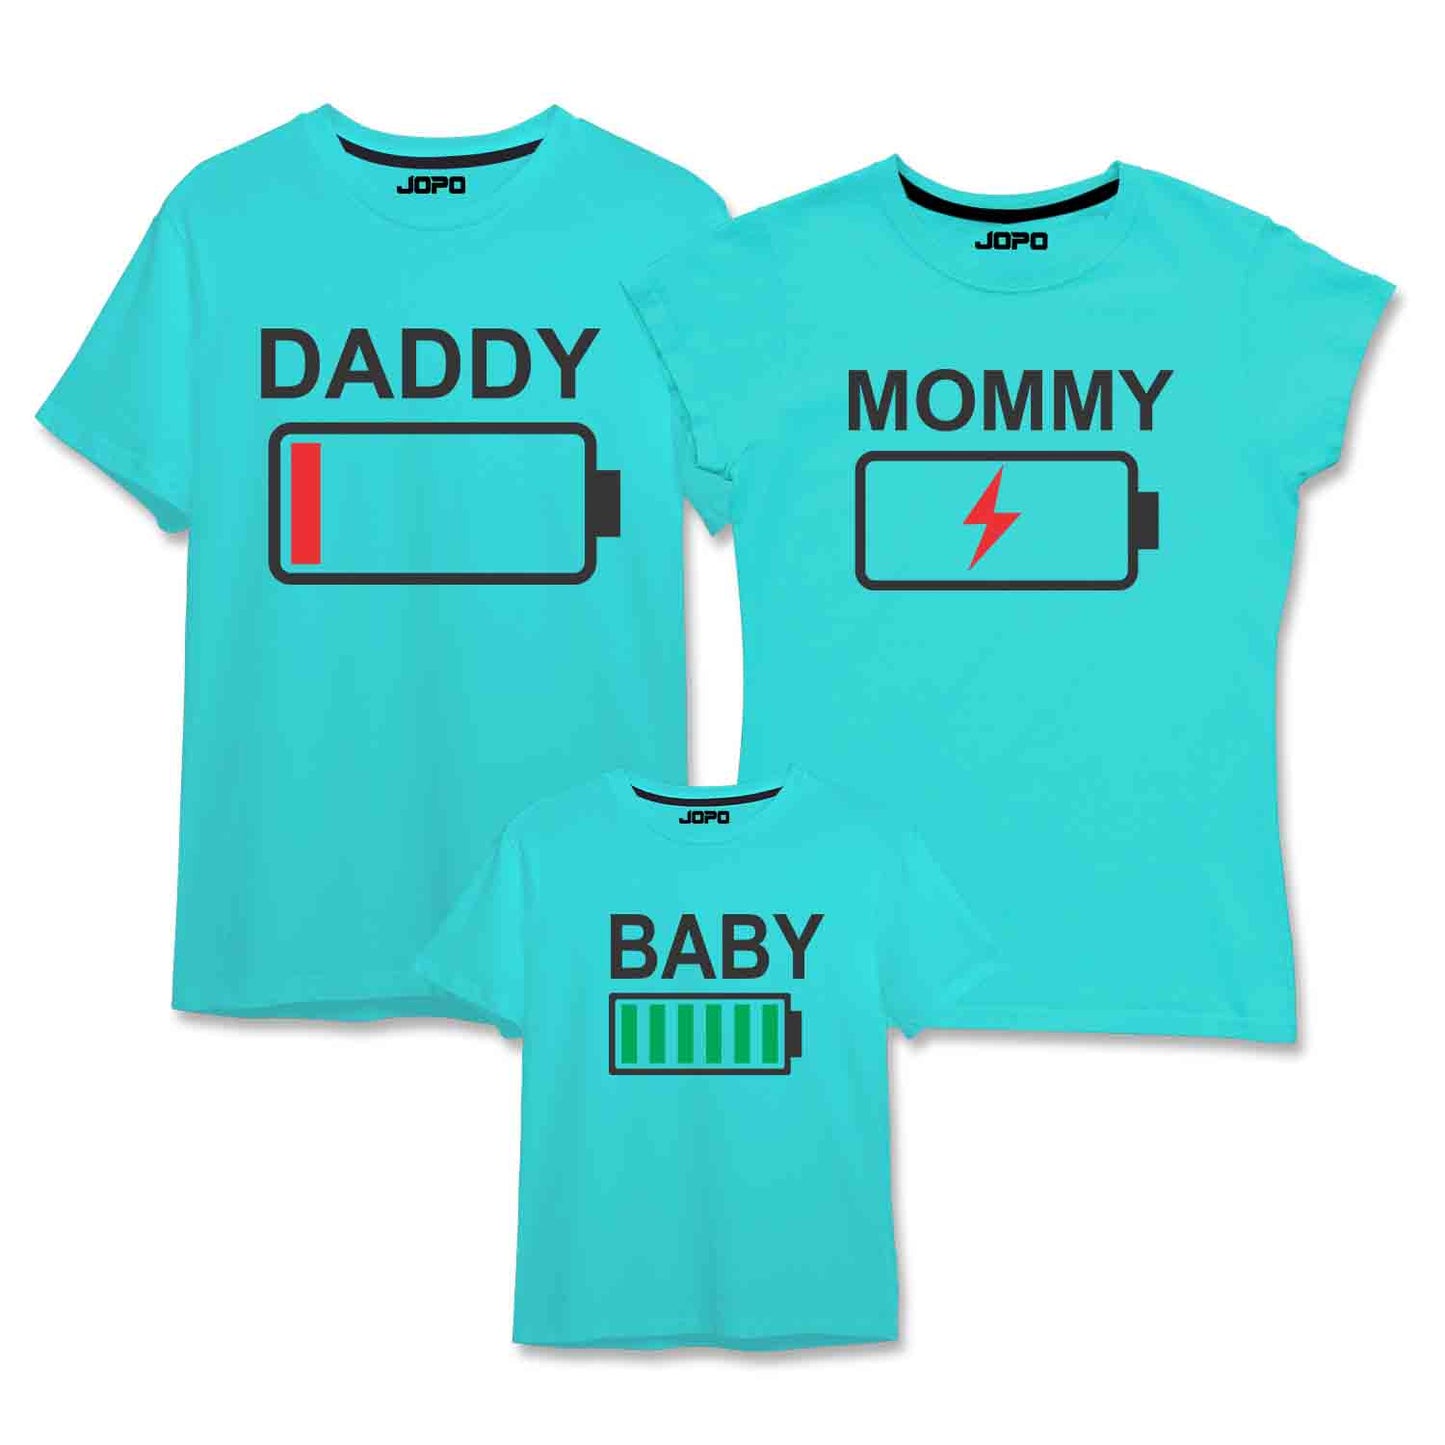 Full Charged Battery Matching Family T-Shirts Set of 3 Mom, Dad, Daughter